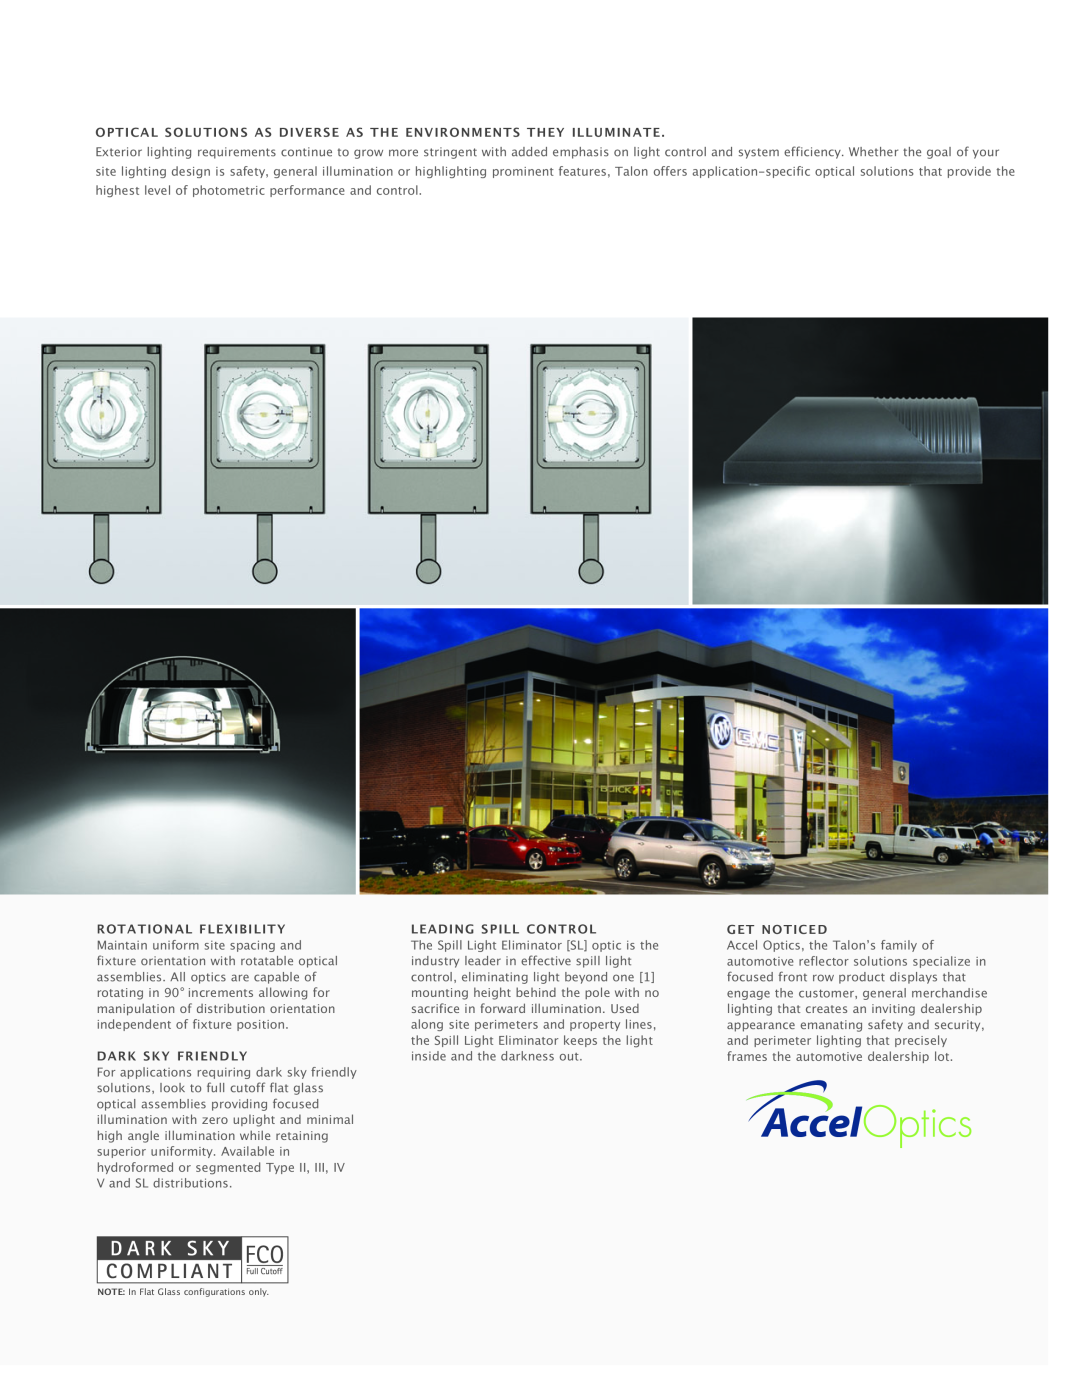 Cooper Lighting Architectural Area Luminaire Optical Solutions As Diverse As The Environments They Illuminate, Get Noticed 